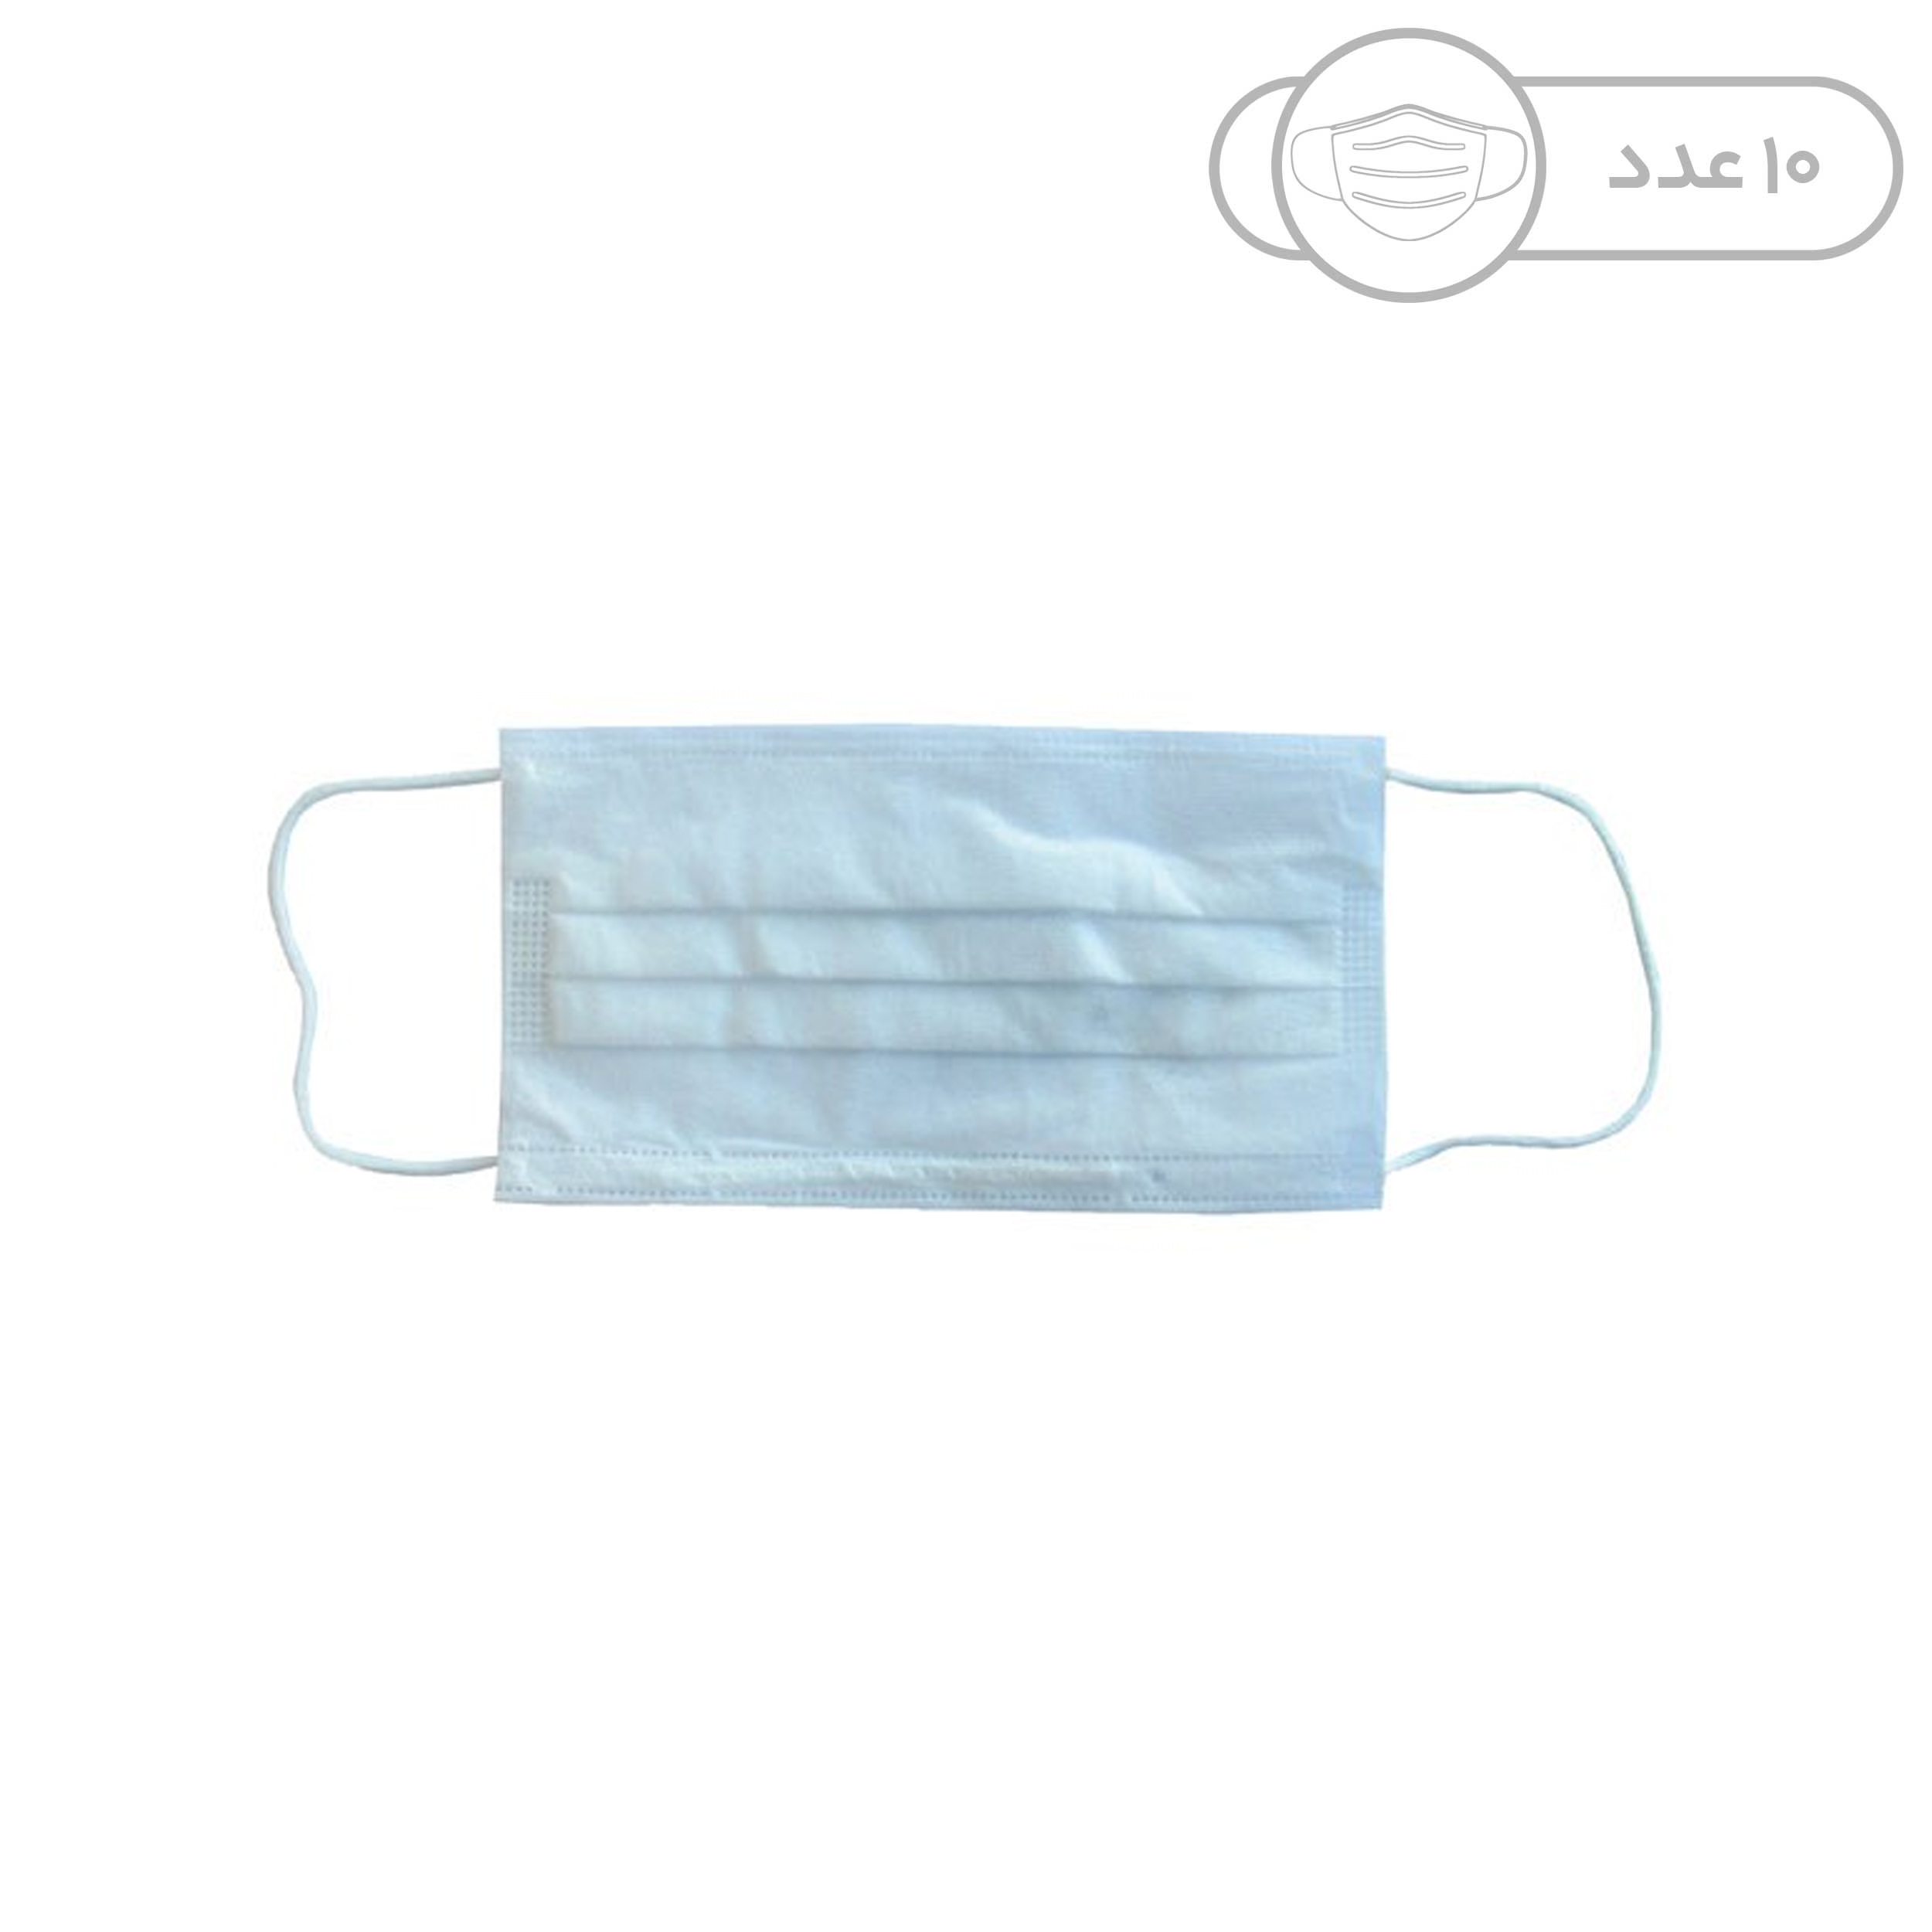 10 pcs Disposable protective breathable face Mask 3 Ply Non woven safe Anti-dust and viruses filter, model nano